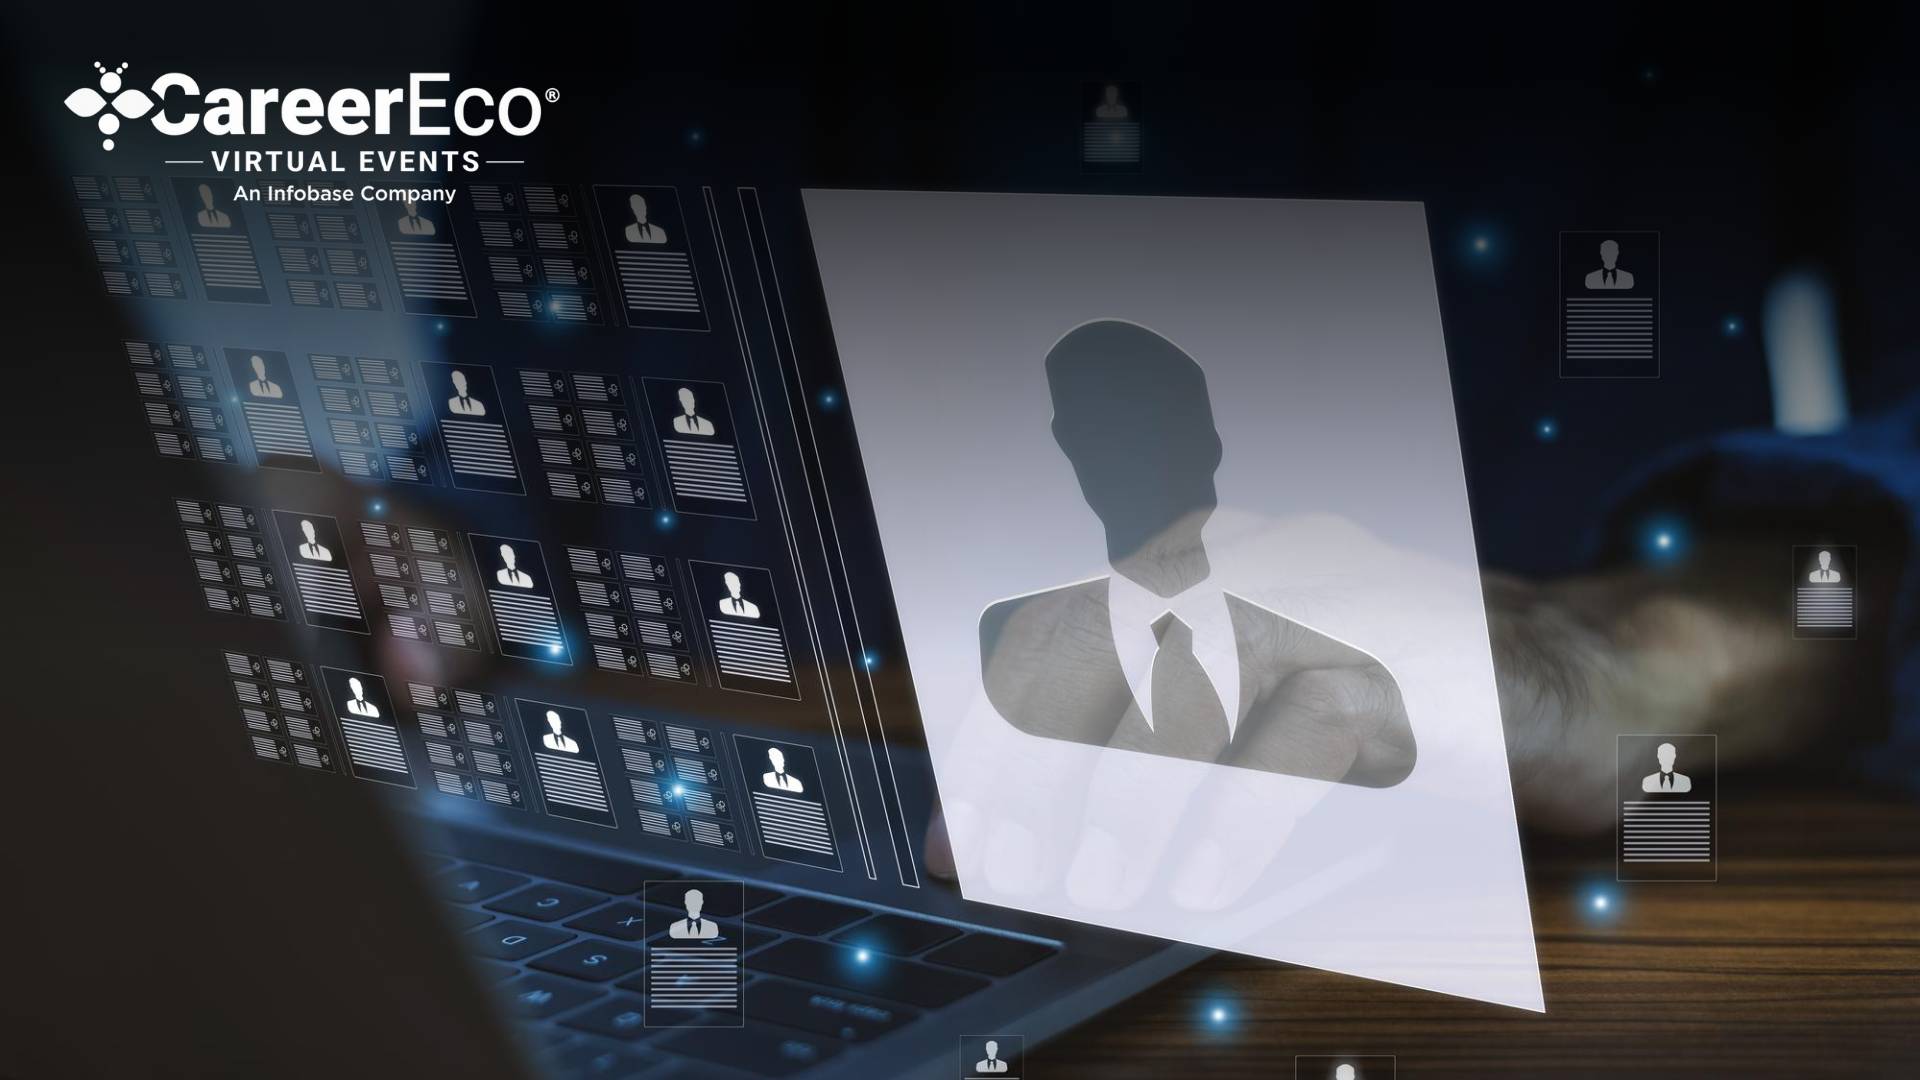 CareerEco Introduces New Self-Service Features to Enhance Virtual Recruitment Events